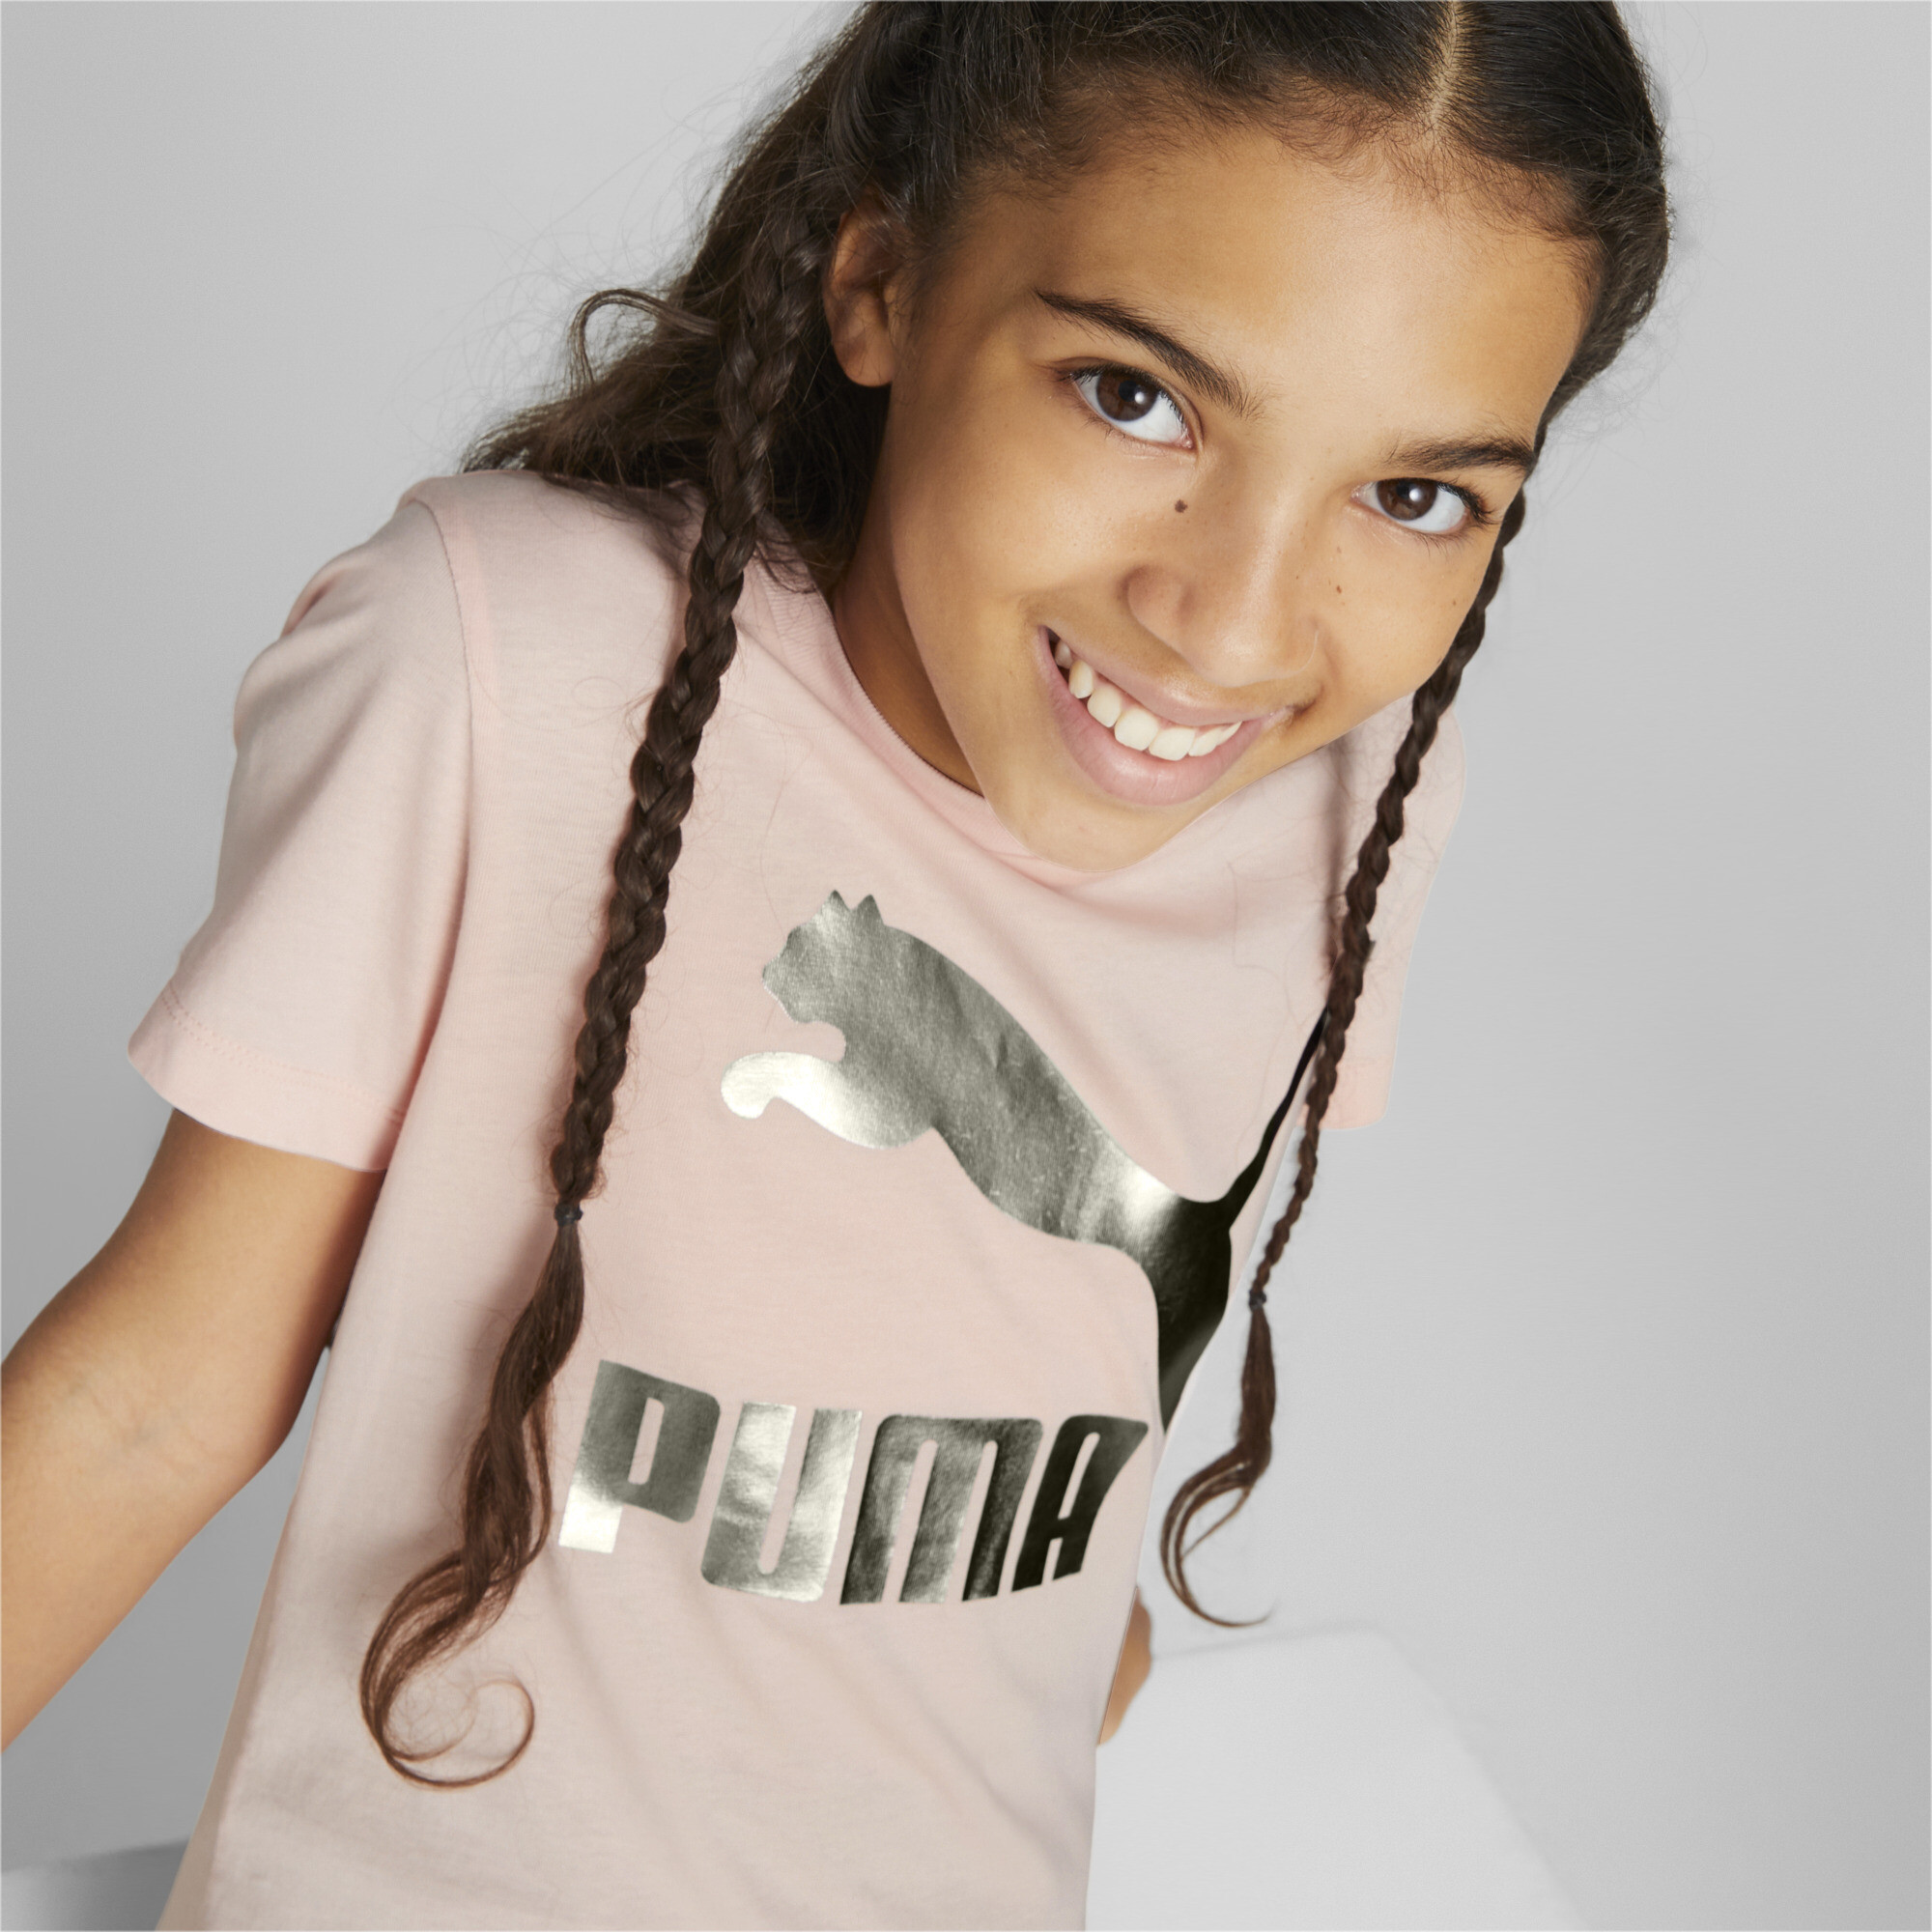 PUMA Classics Logo T-Shirt In Pink, Size 5-6 Youth